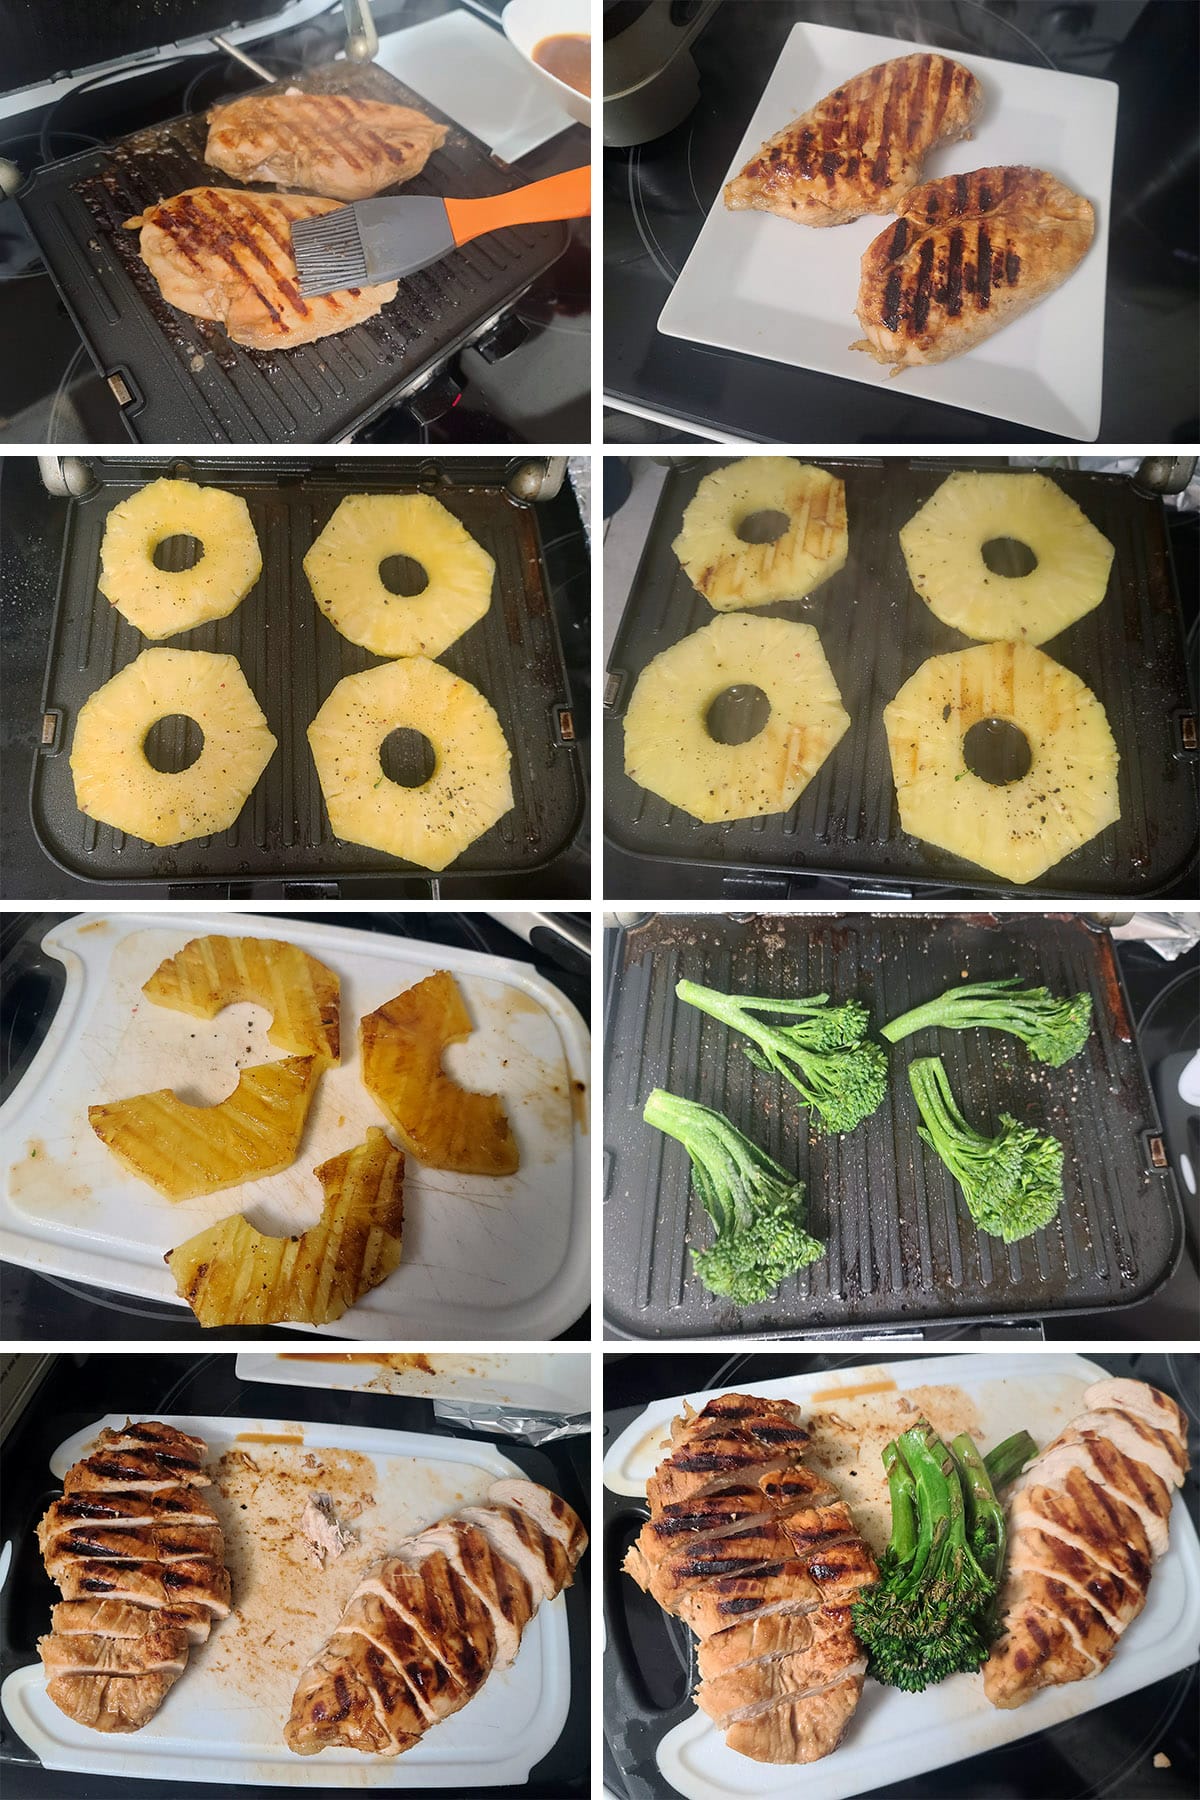 An 8 part image showing the chicken, pineapple, and broccolini being grilled, then the chicken sliced.